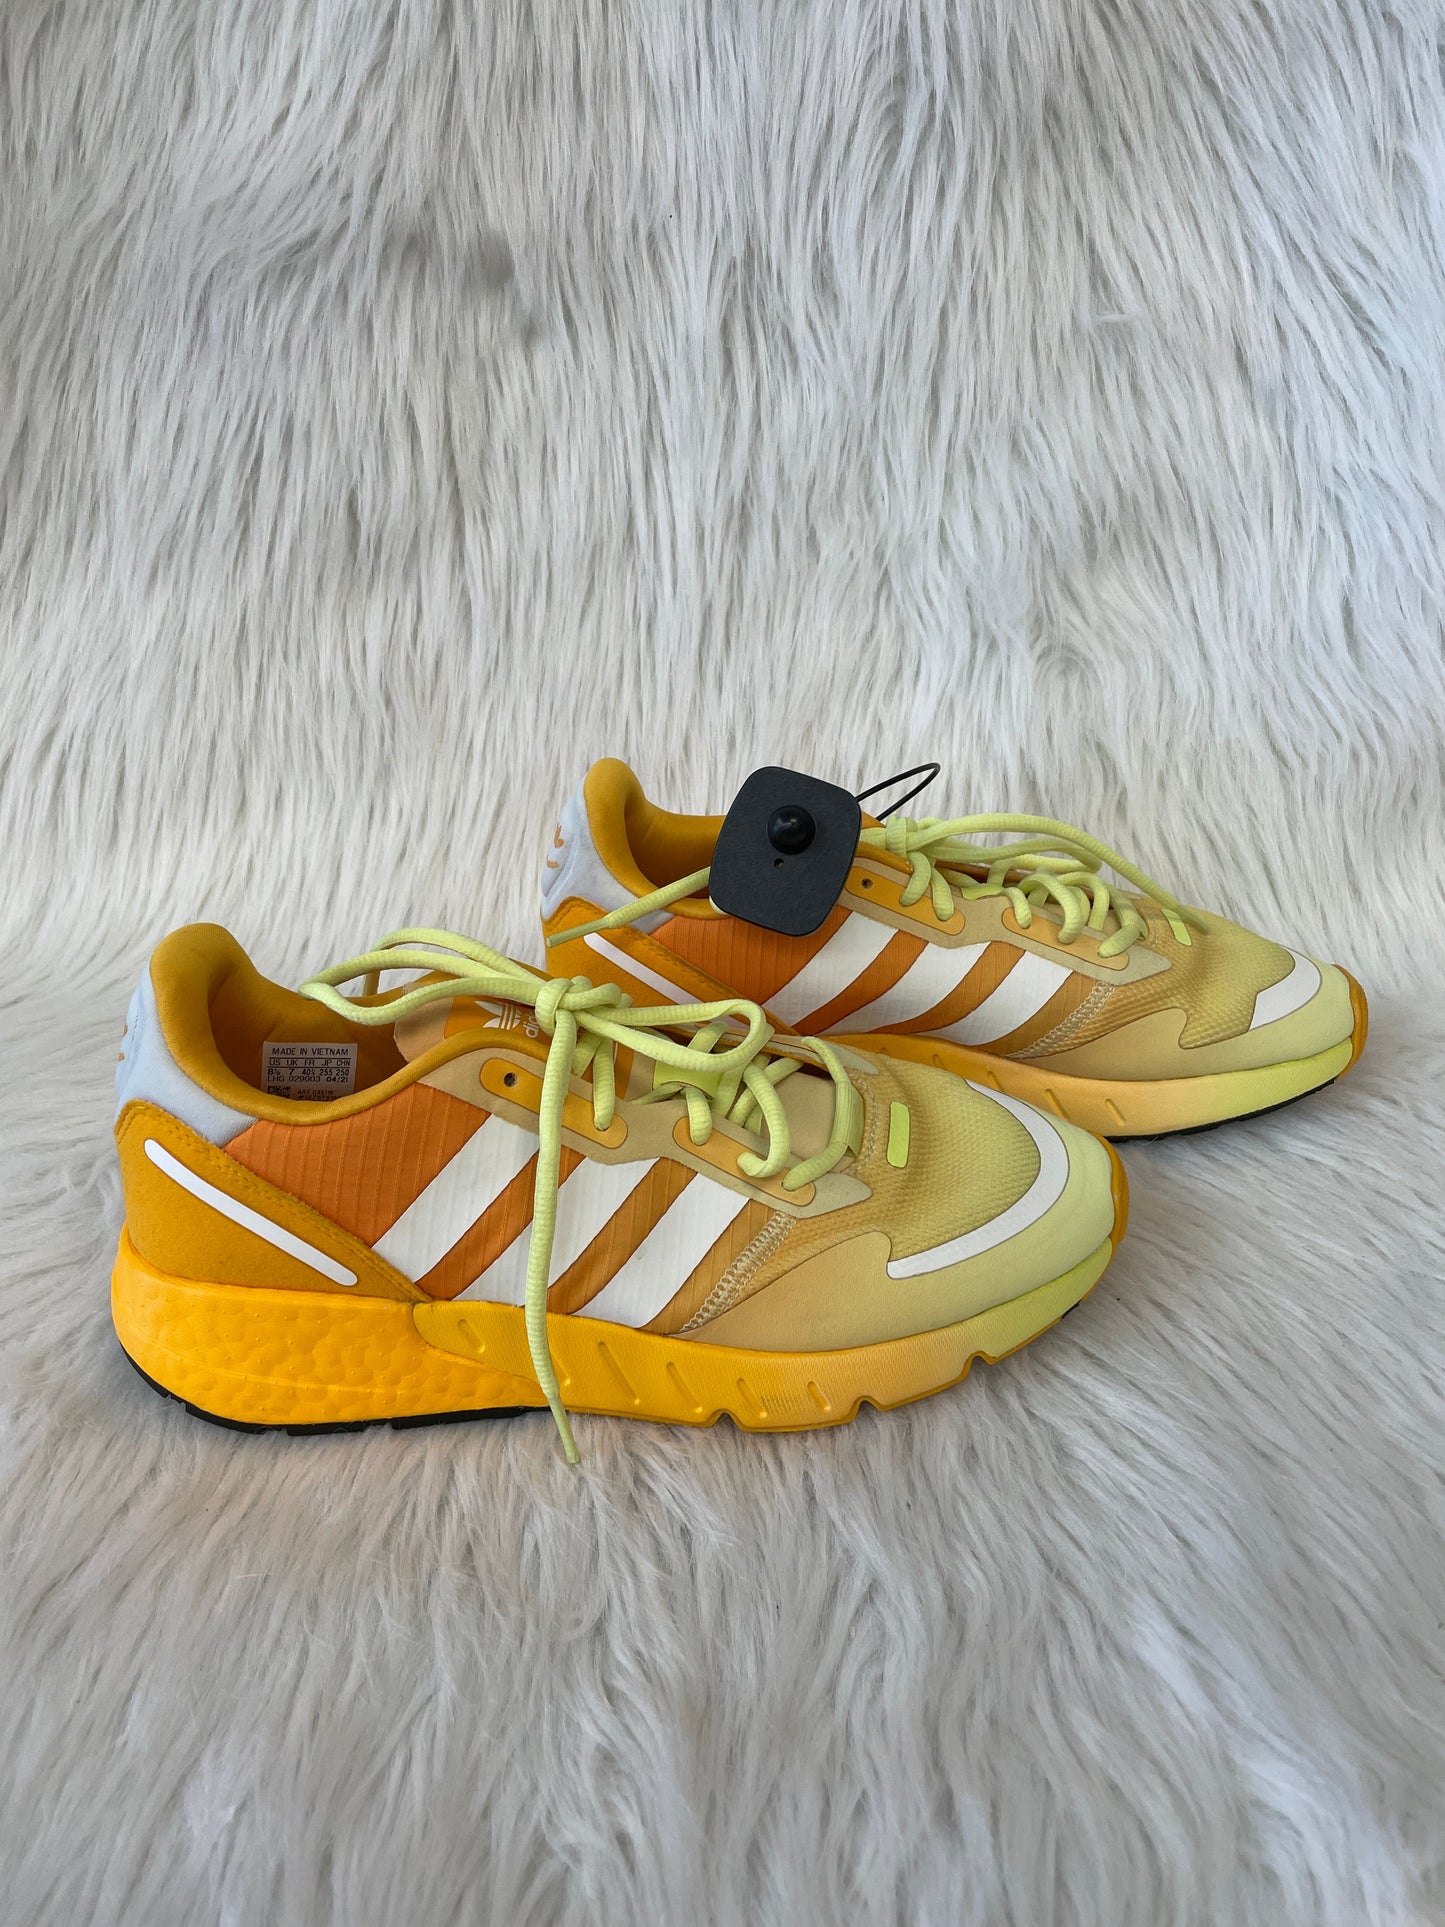 Gold Shoes Athletic Adidas, Size 8.5